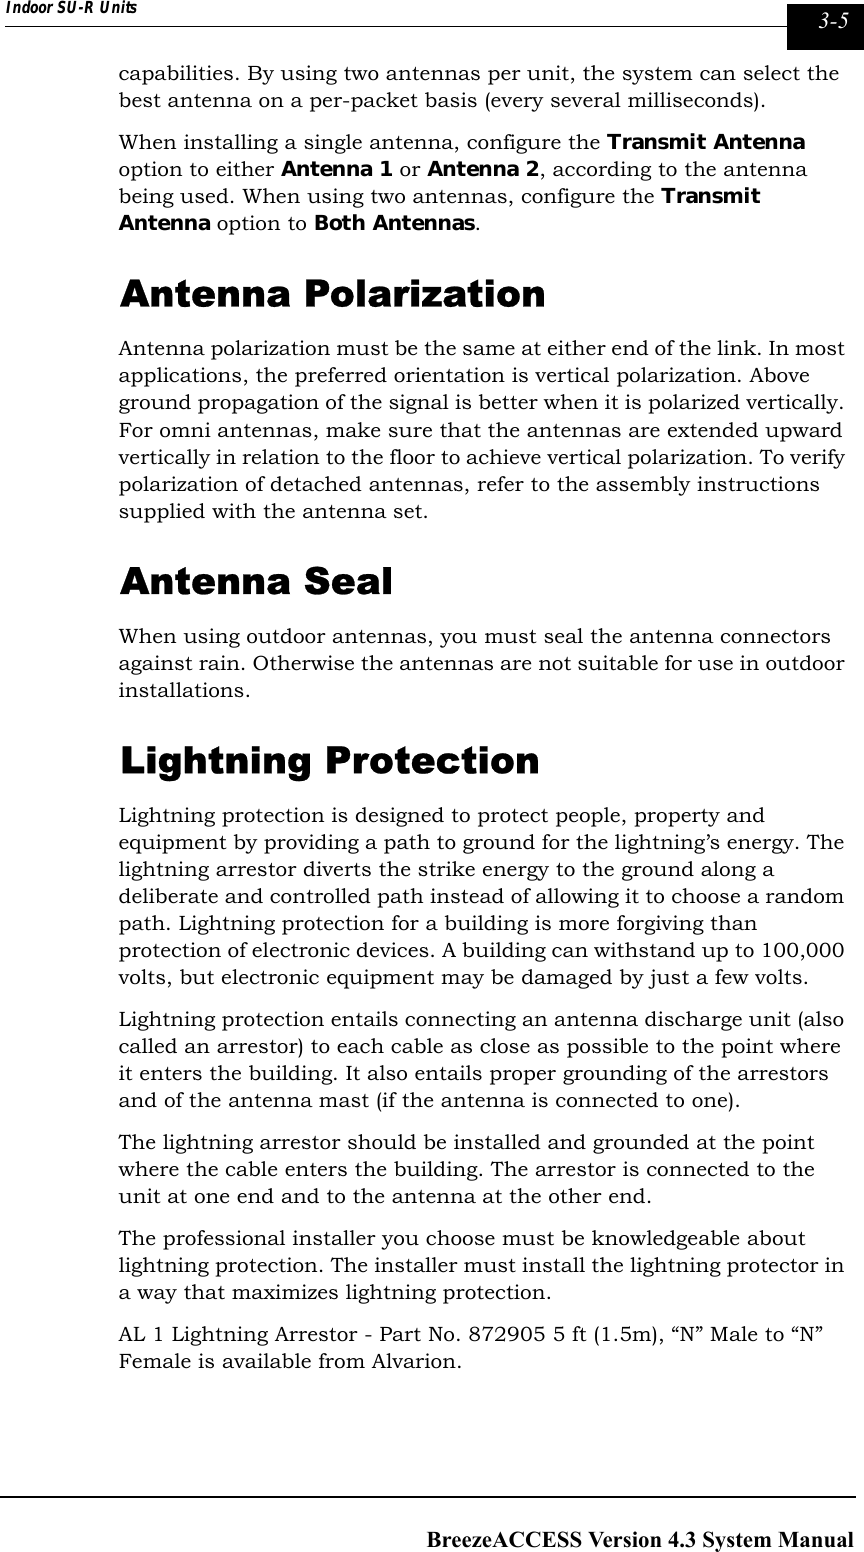 Page 89 of Alvarion Technologies IF-24-SYNC Broadband Wireless Access System User Manual